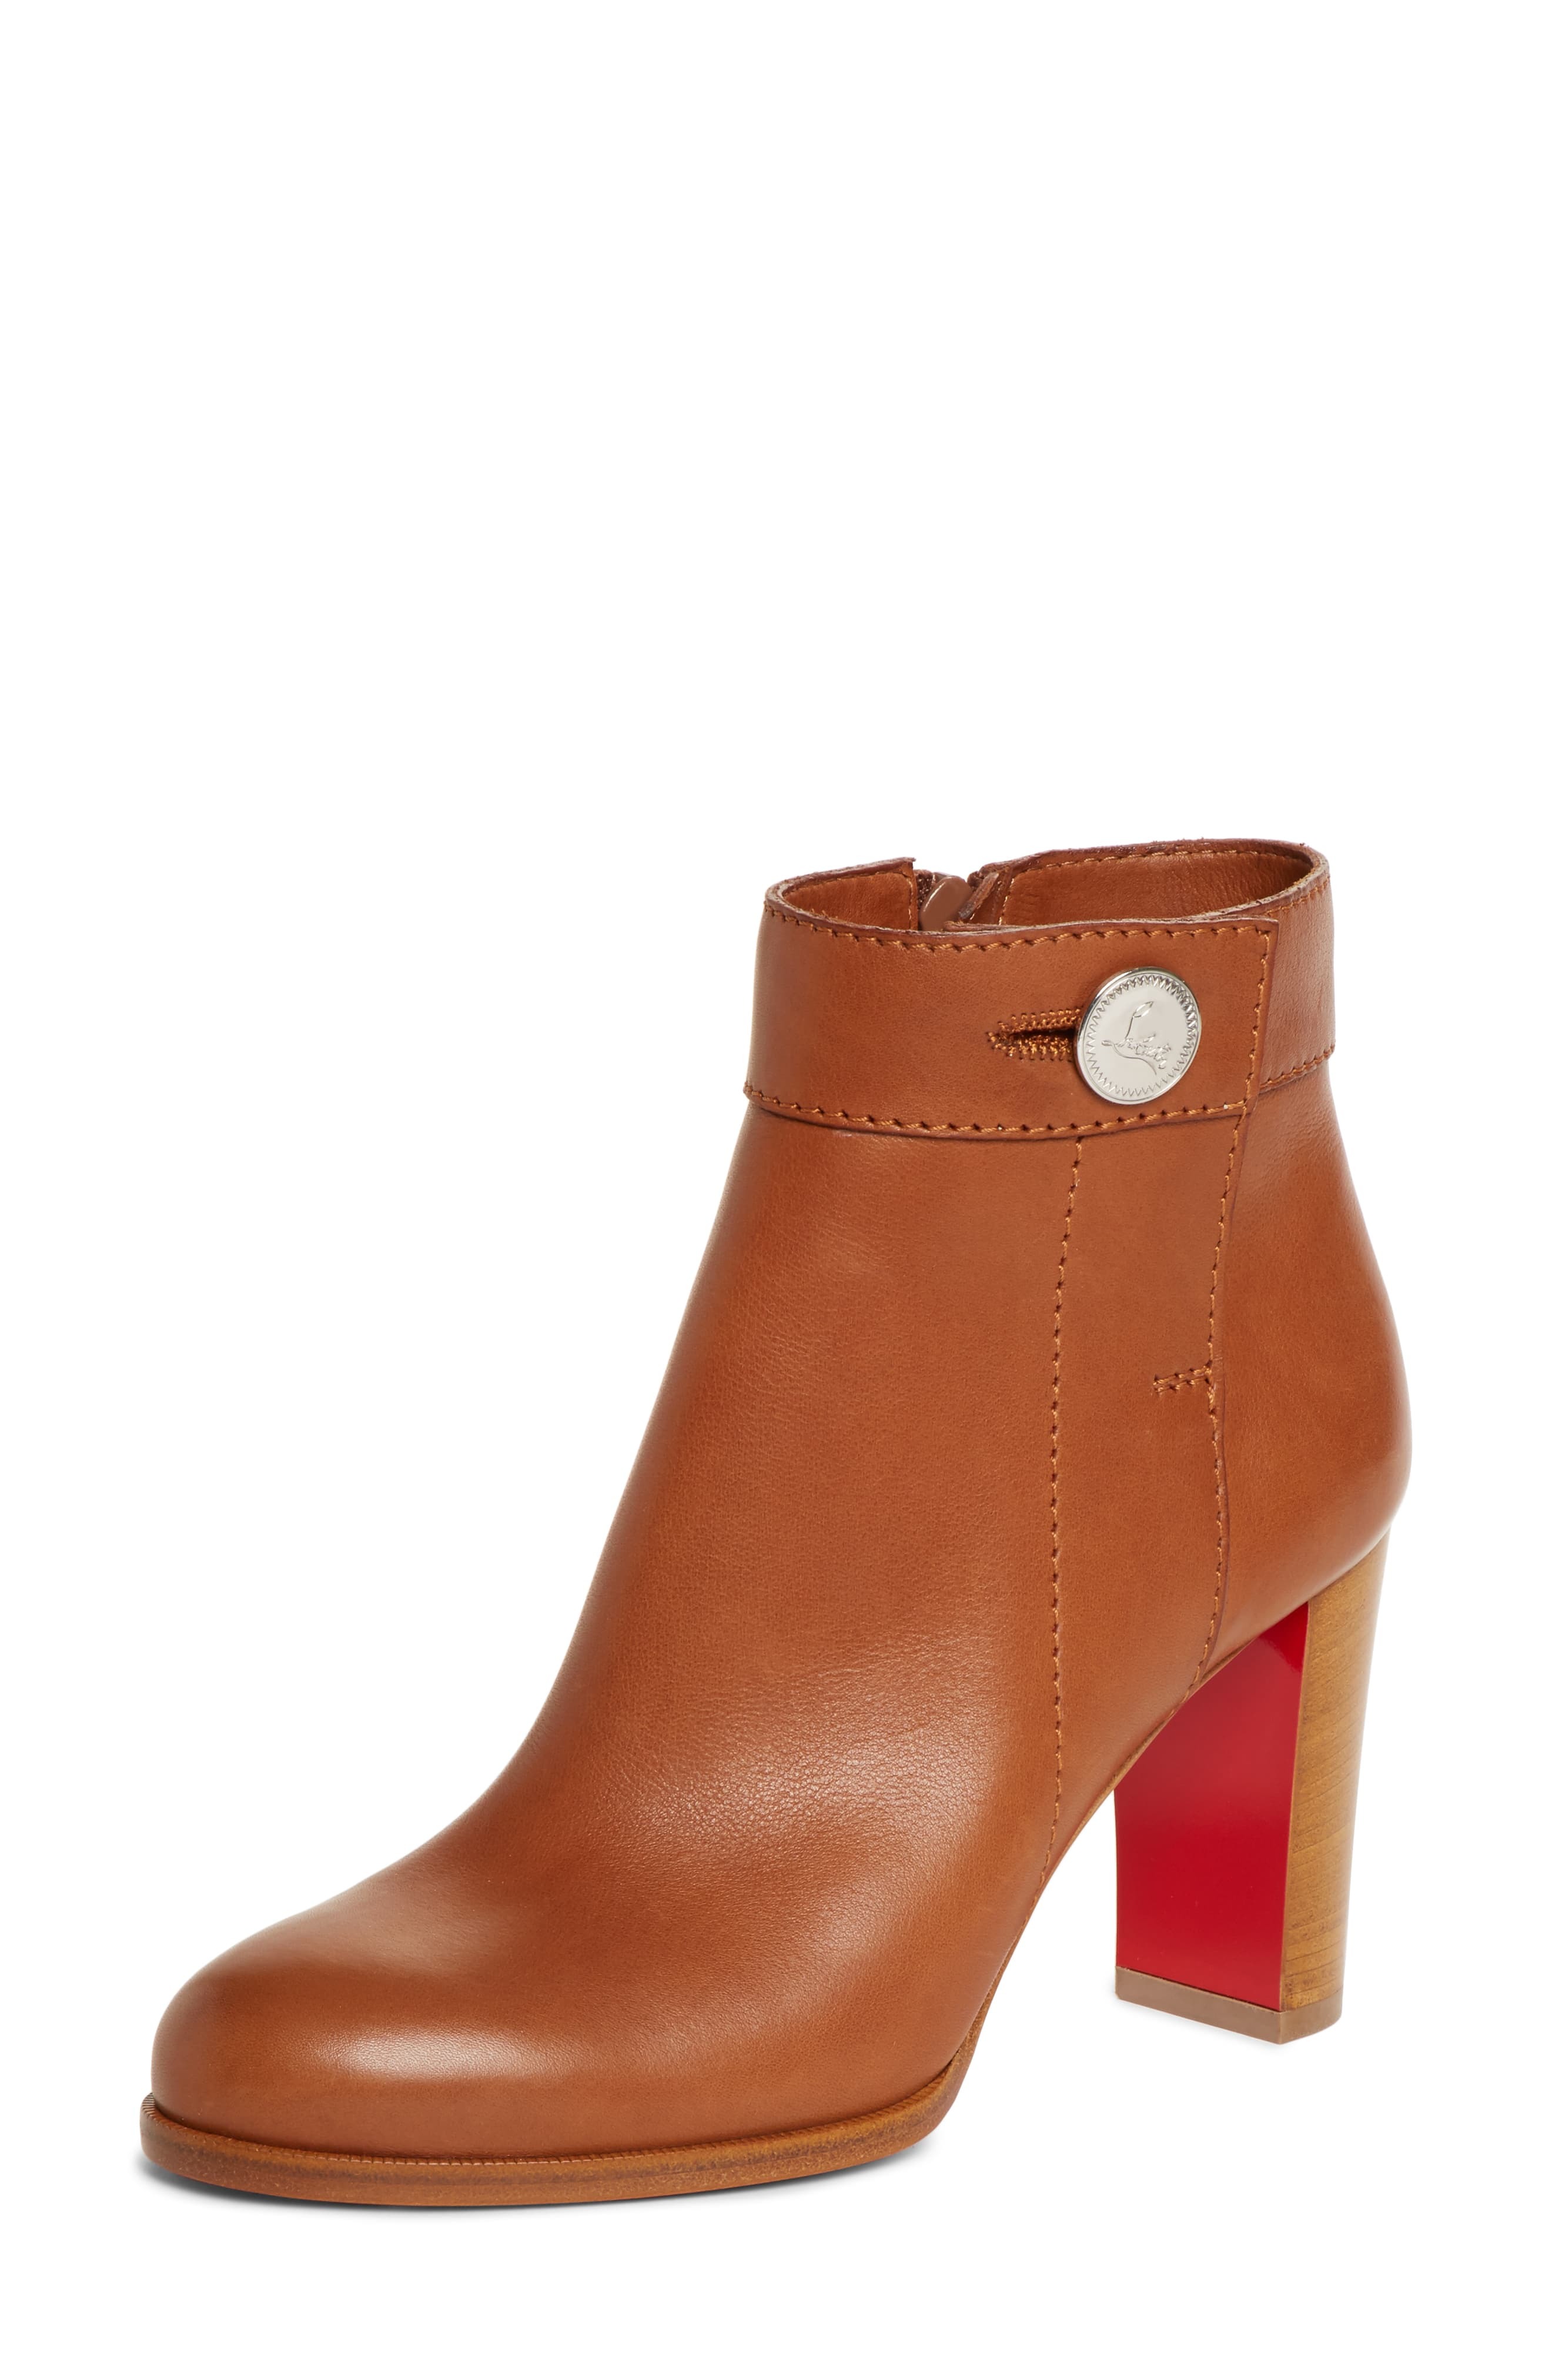 louboutin boots nordstrom